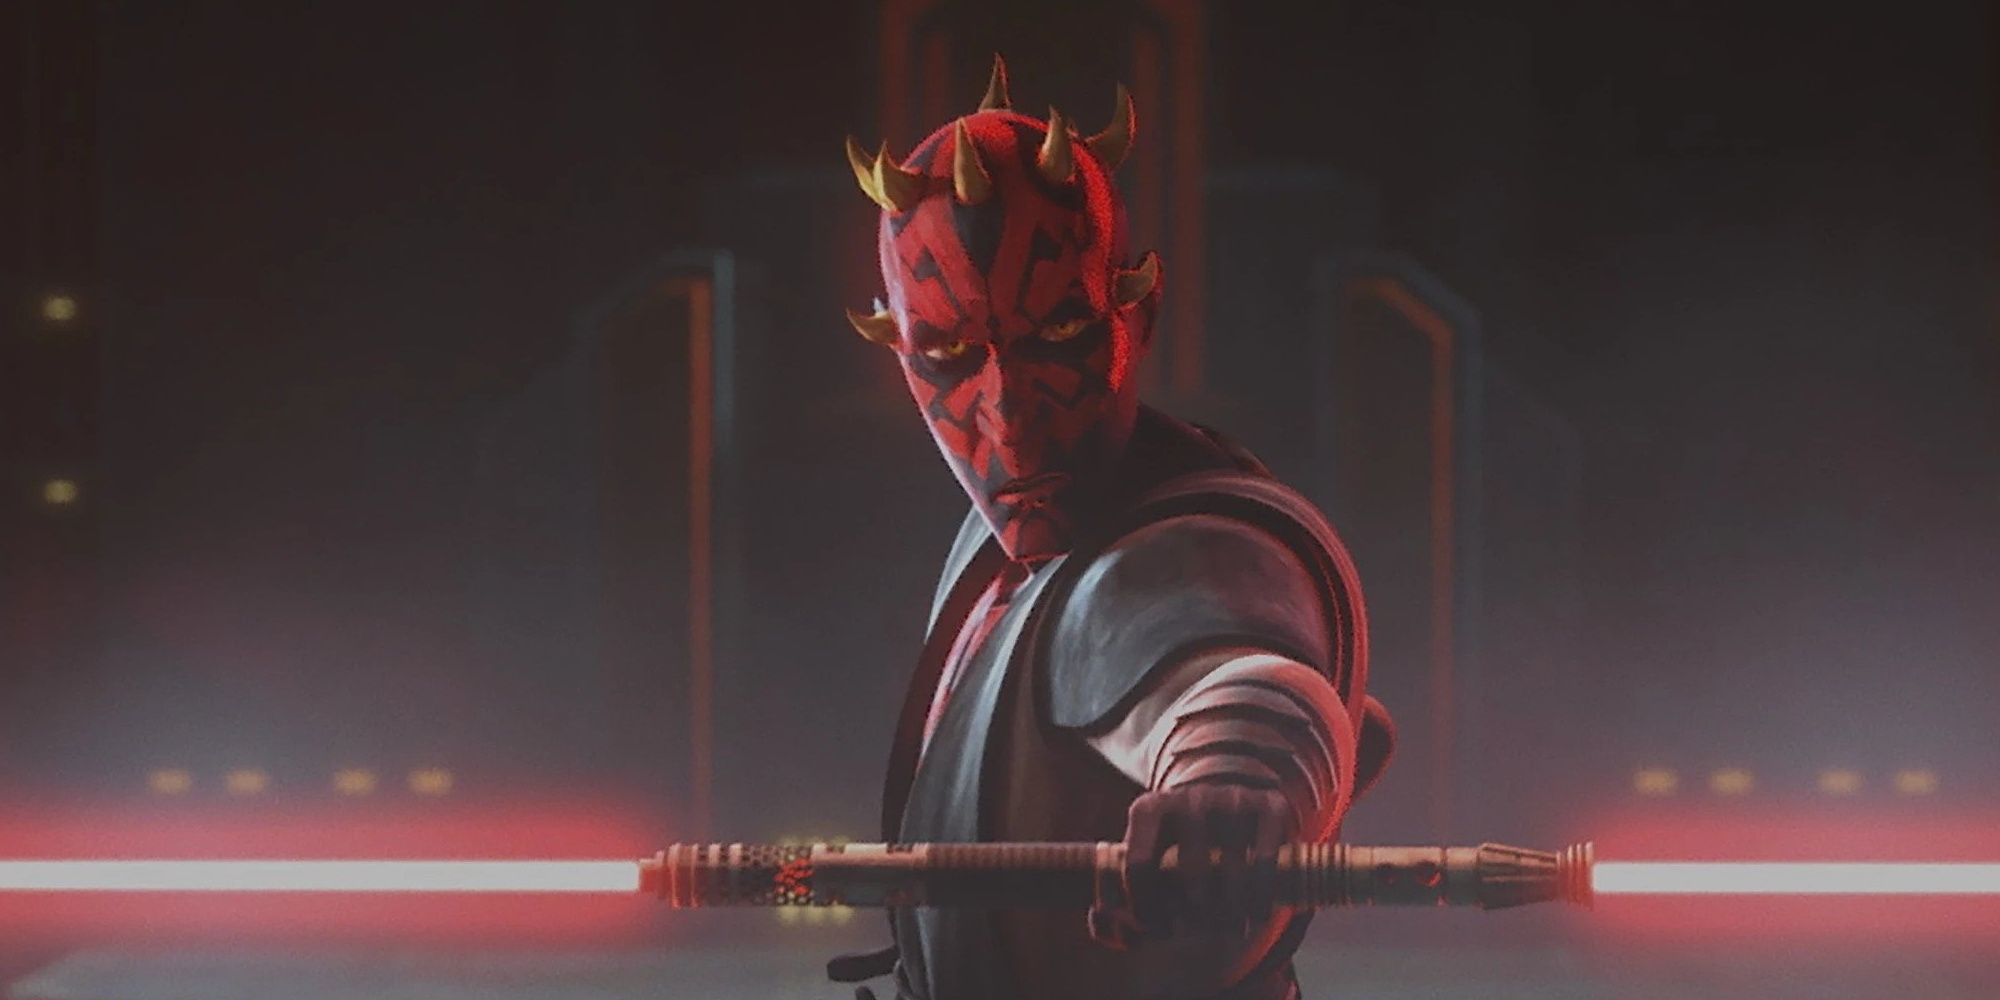 Darth Maul standing menacingly with his lightsaber out in Star Wars: The Clone Wars